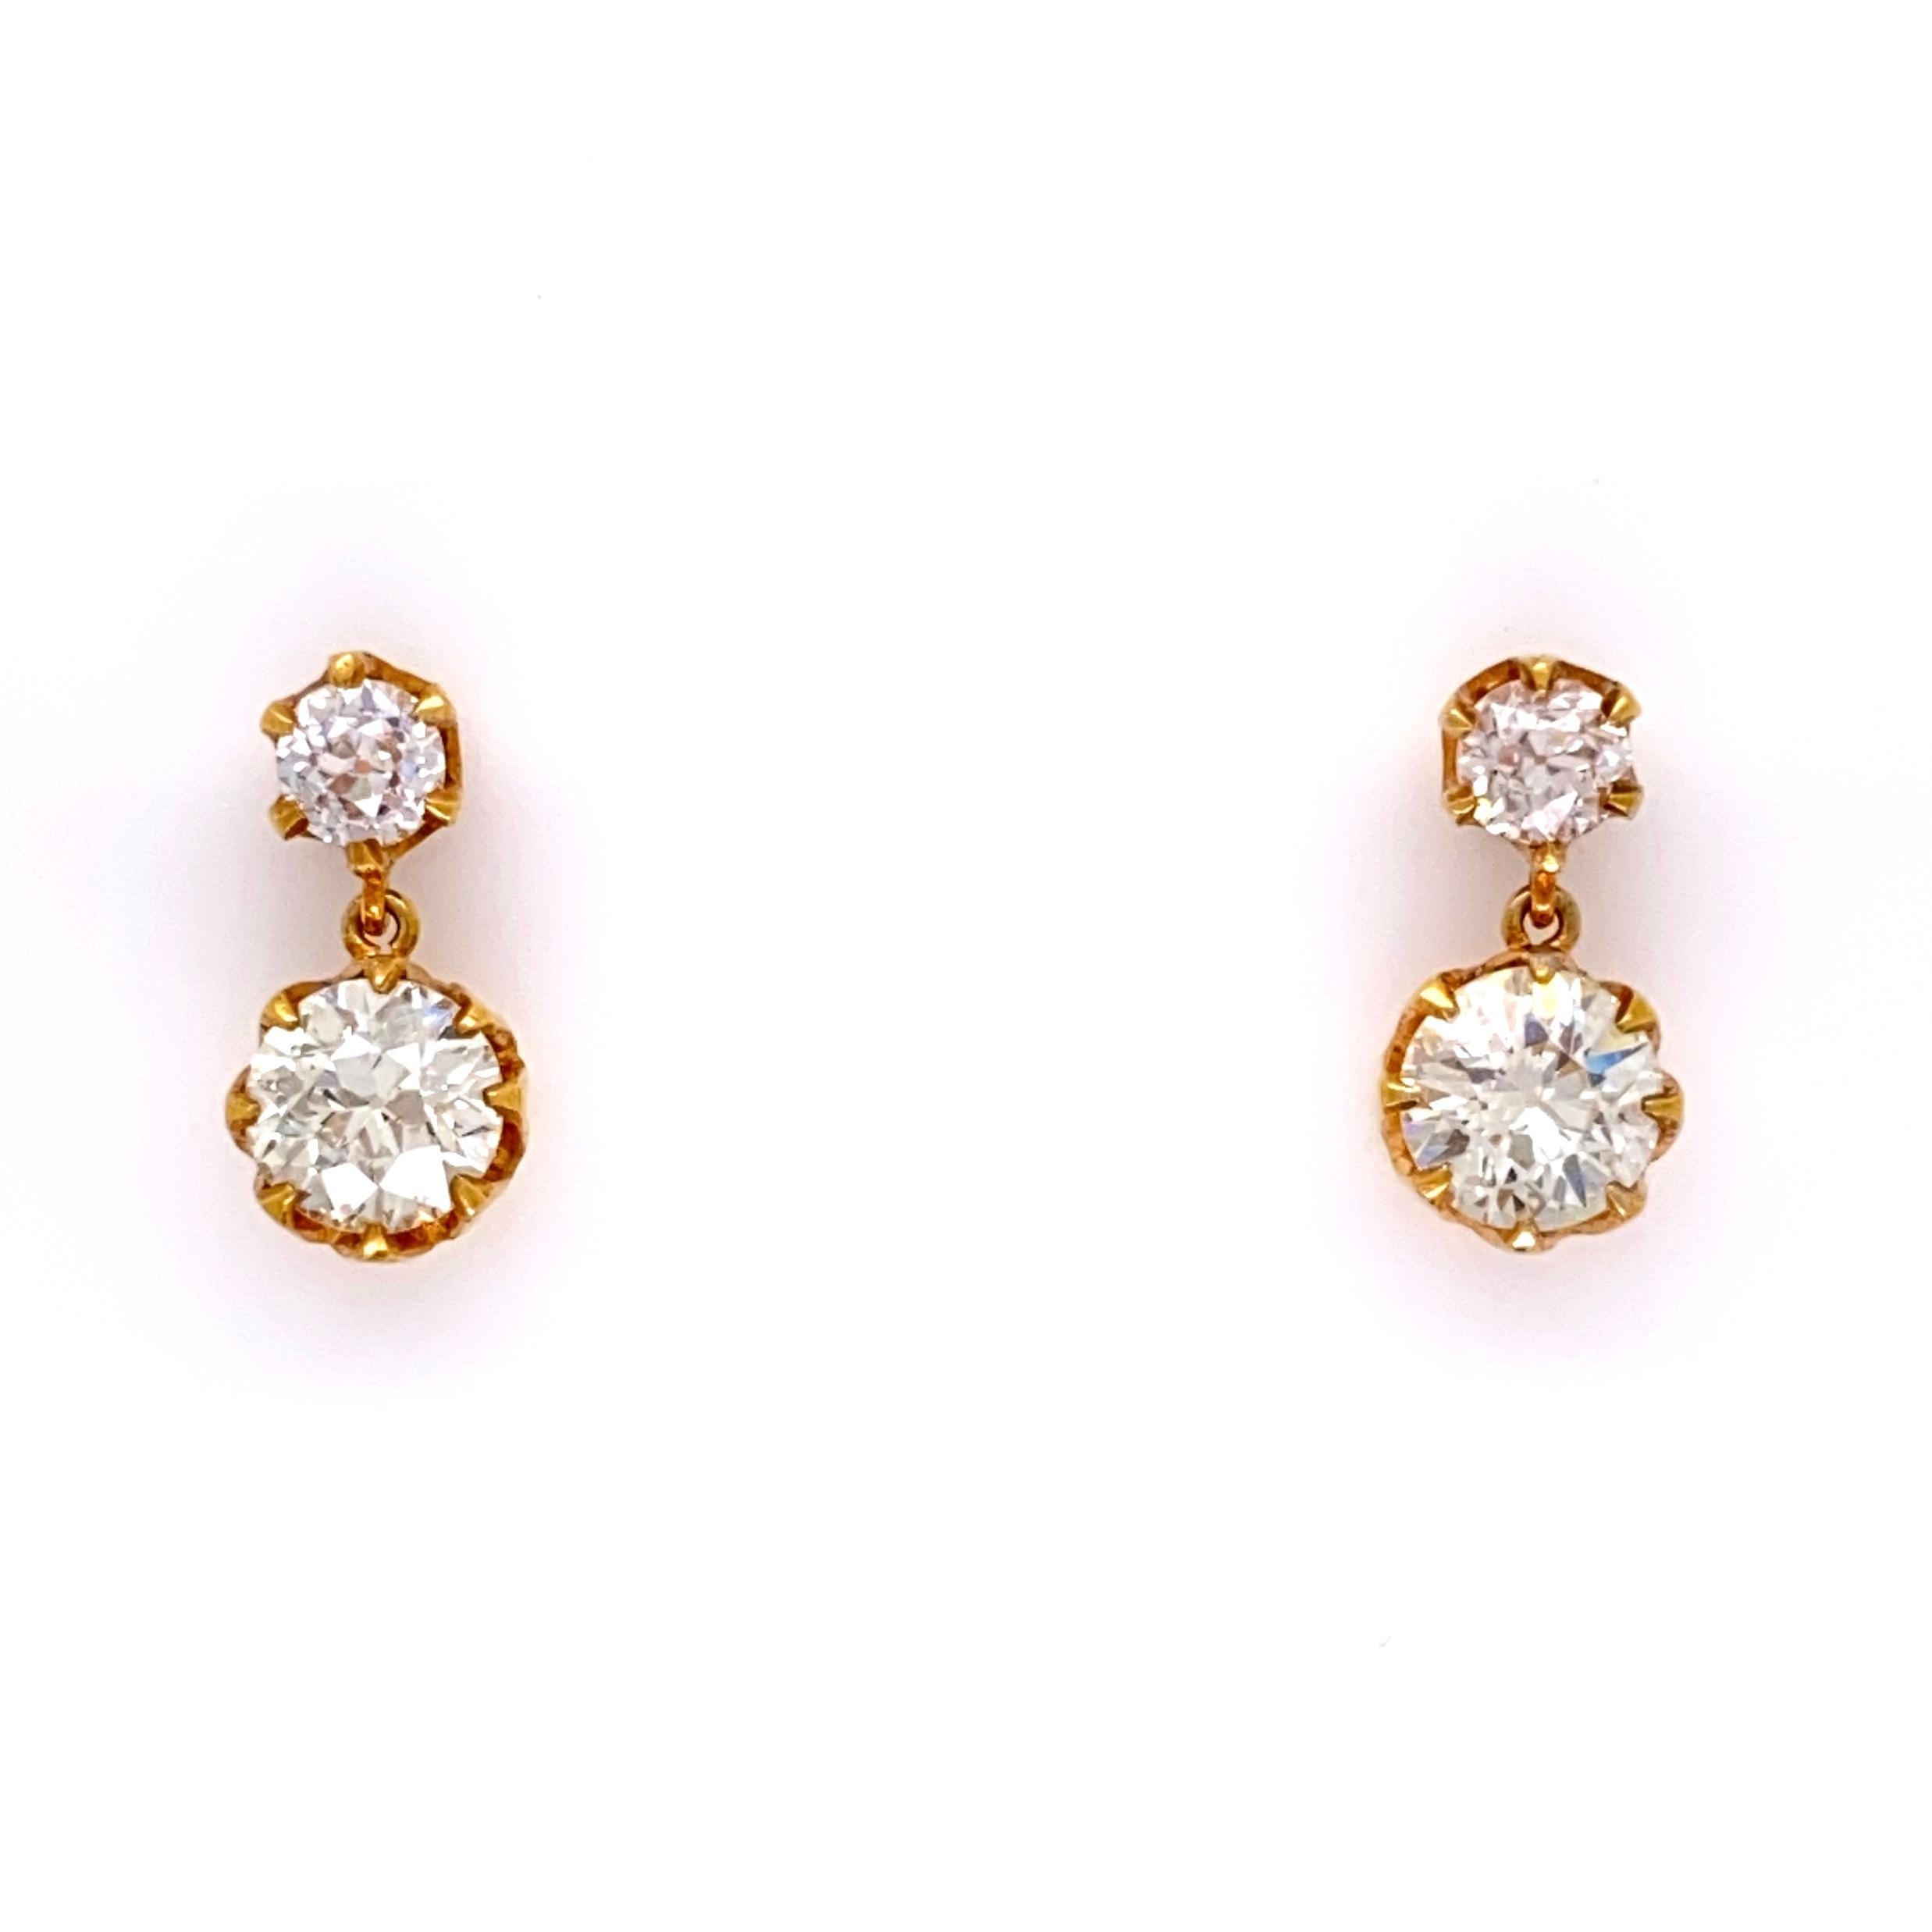 Simply Beautiful! Finely detailed Double Drop Gold Earrings. Hand set with 2 Old European Diamonds weighing approx. 1.60tcw and 2 Diamonds, approx. 0.36tcw. Measuring approx. 0.50